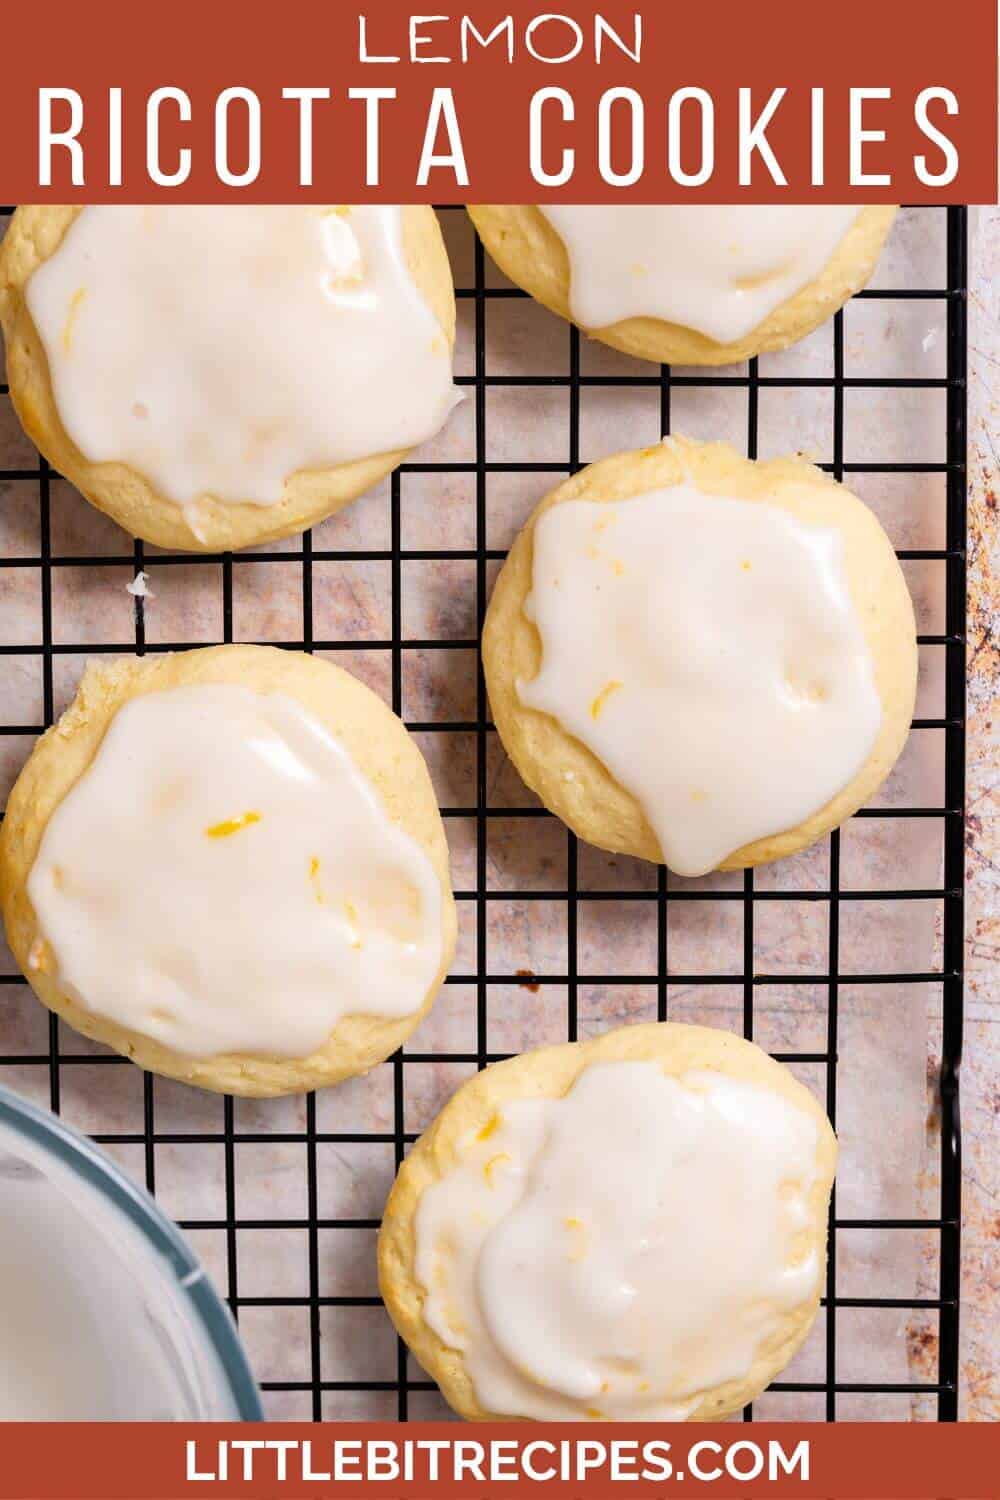 Lemon ricotta cookies with text on image.